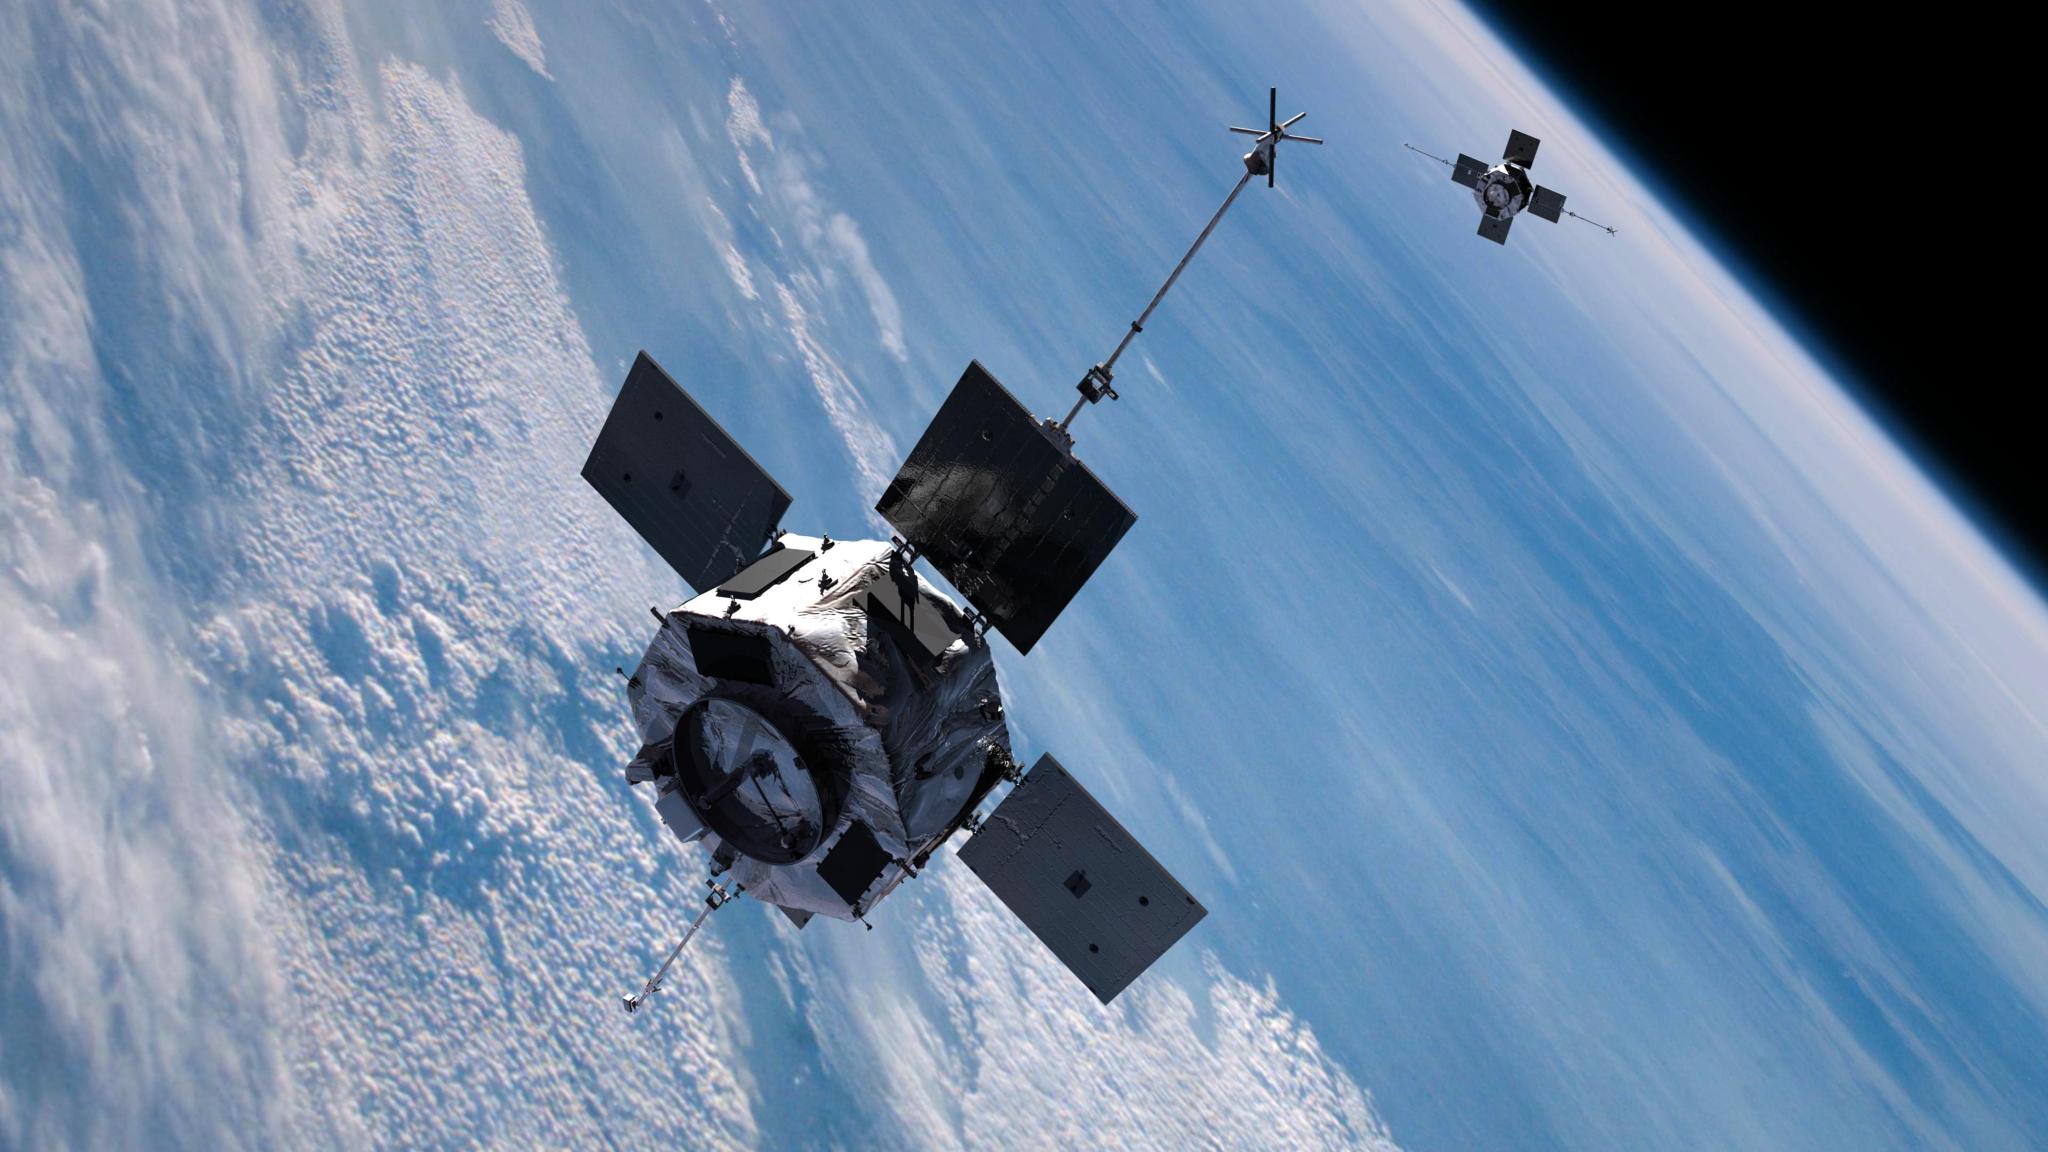 The Van Allen Probes, which look like two silver boxes with four squat solar panels and two antennae. They are soaring in space over the light blue and cloudy limb of Earth.